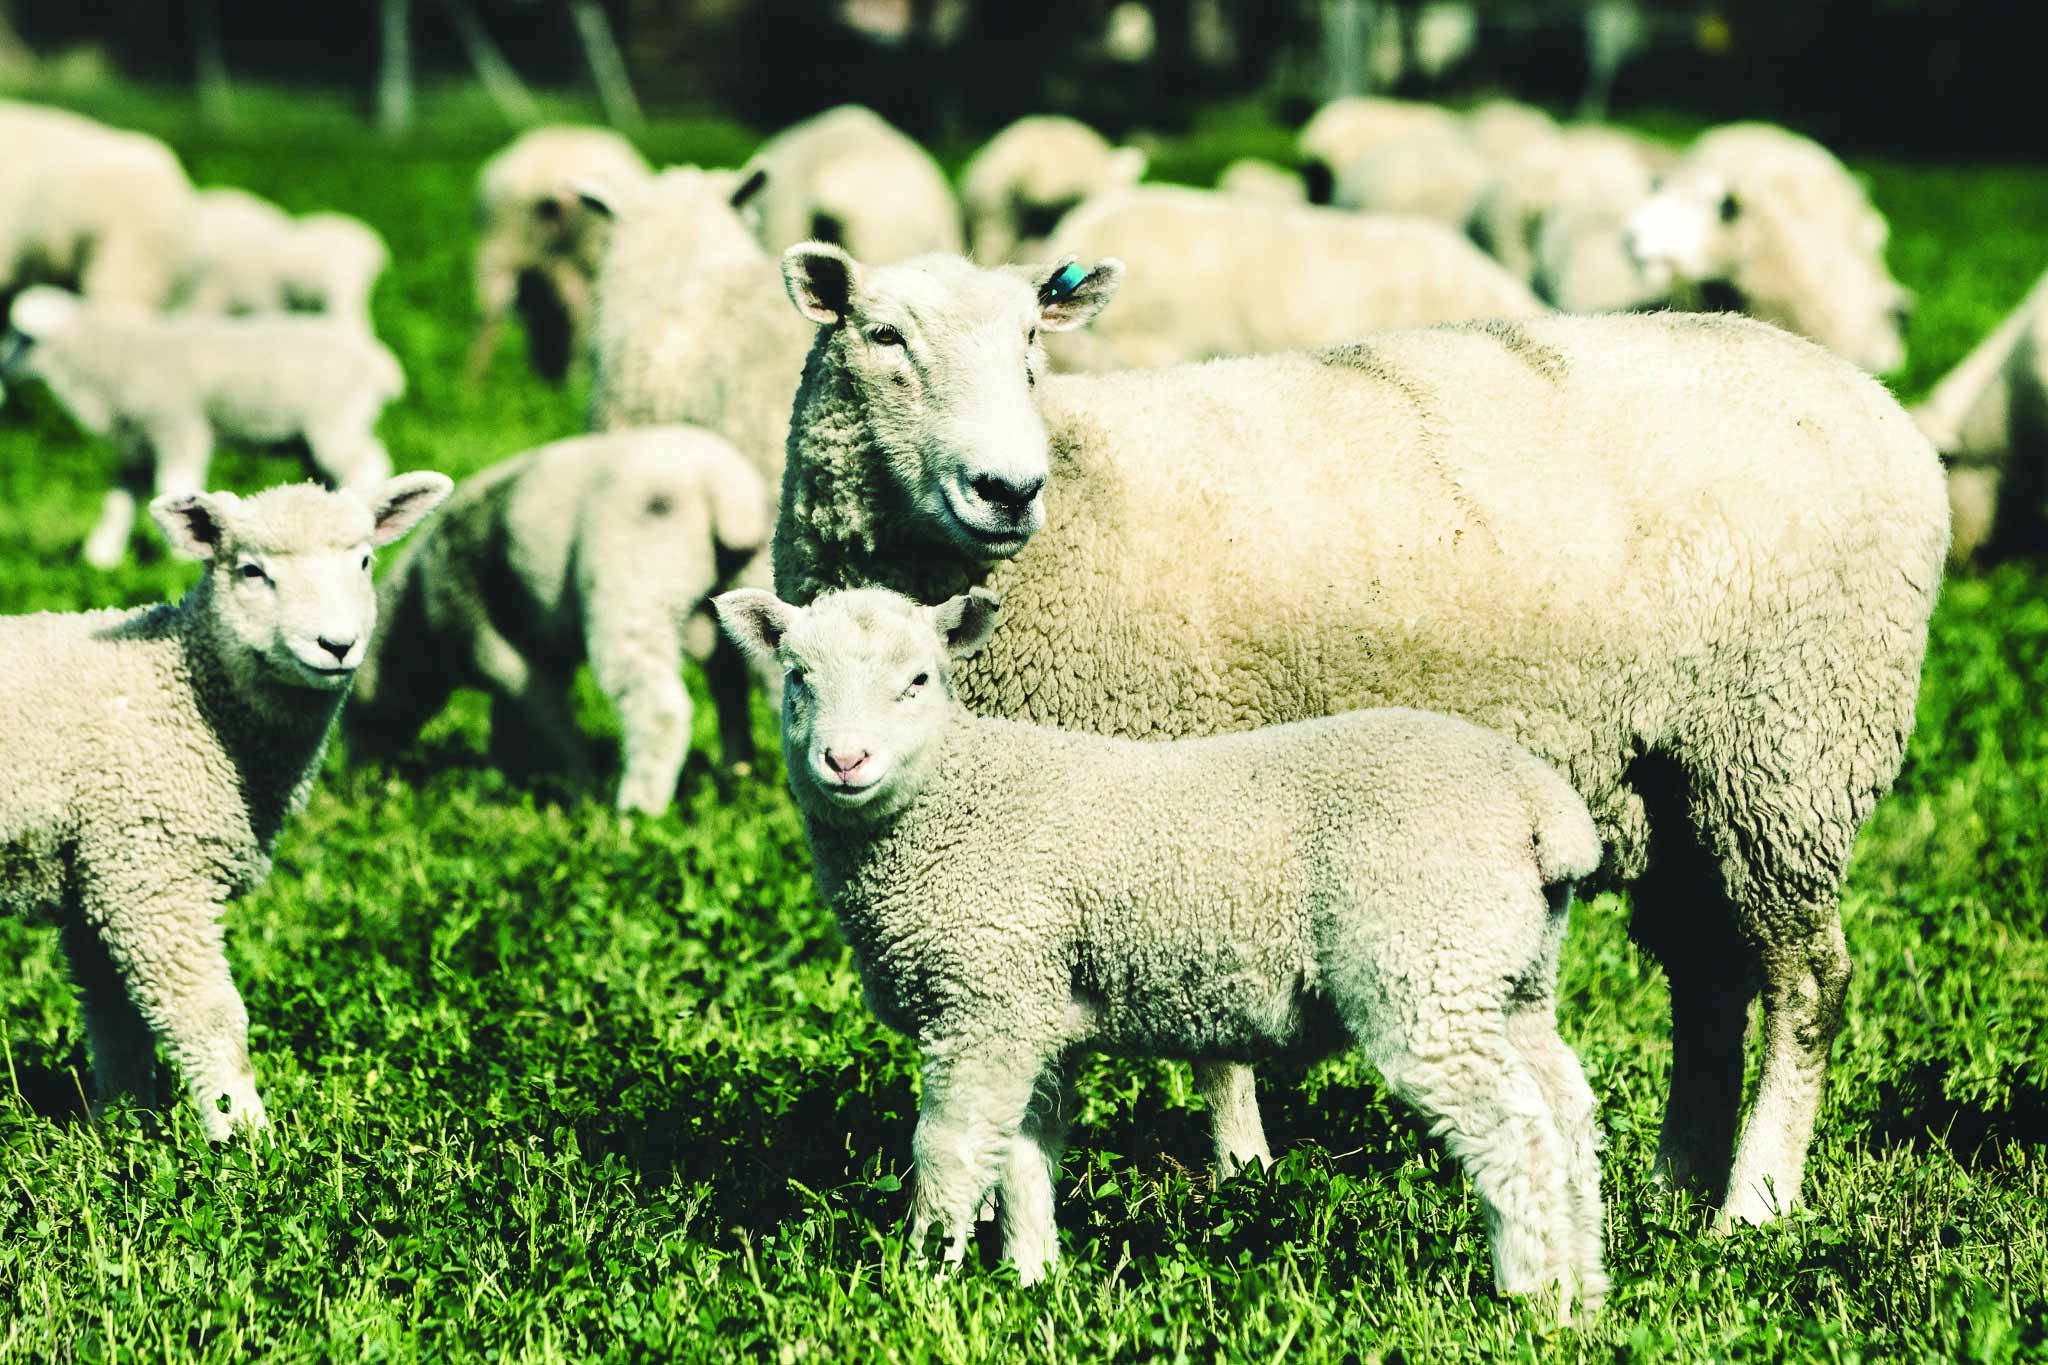 Avery Sheep Case – Investing in Allflex RapID tags now for better future performance